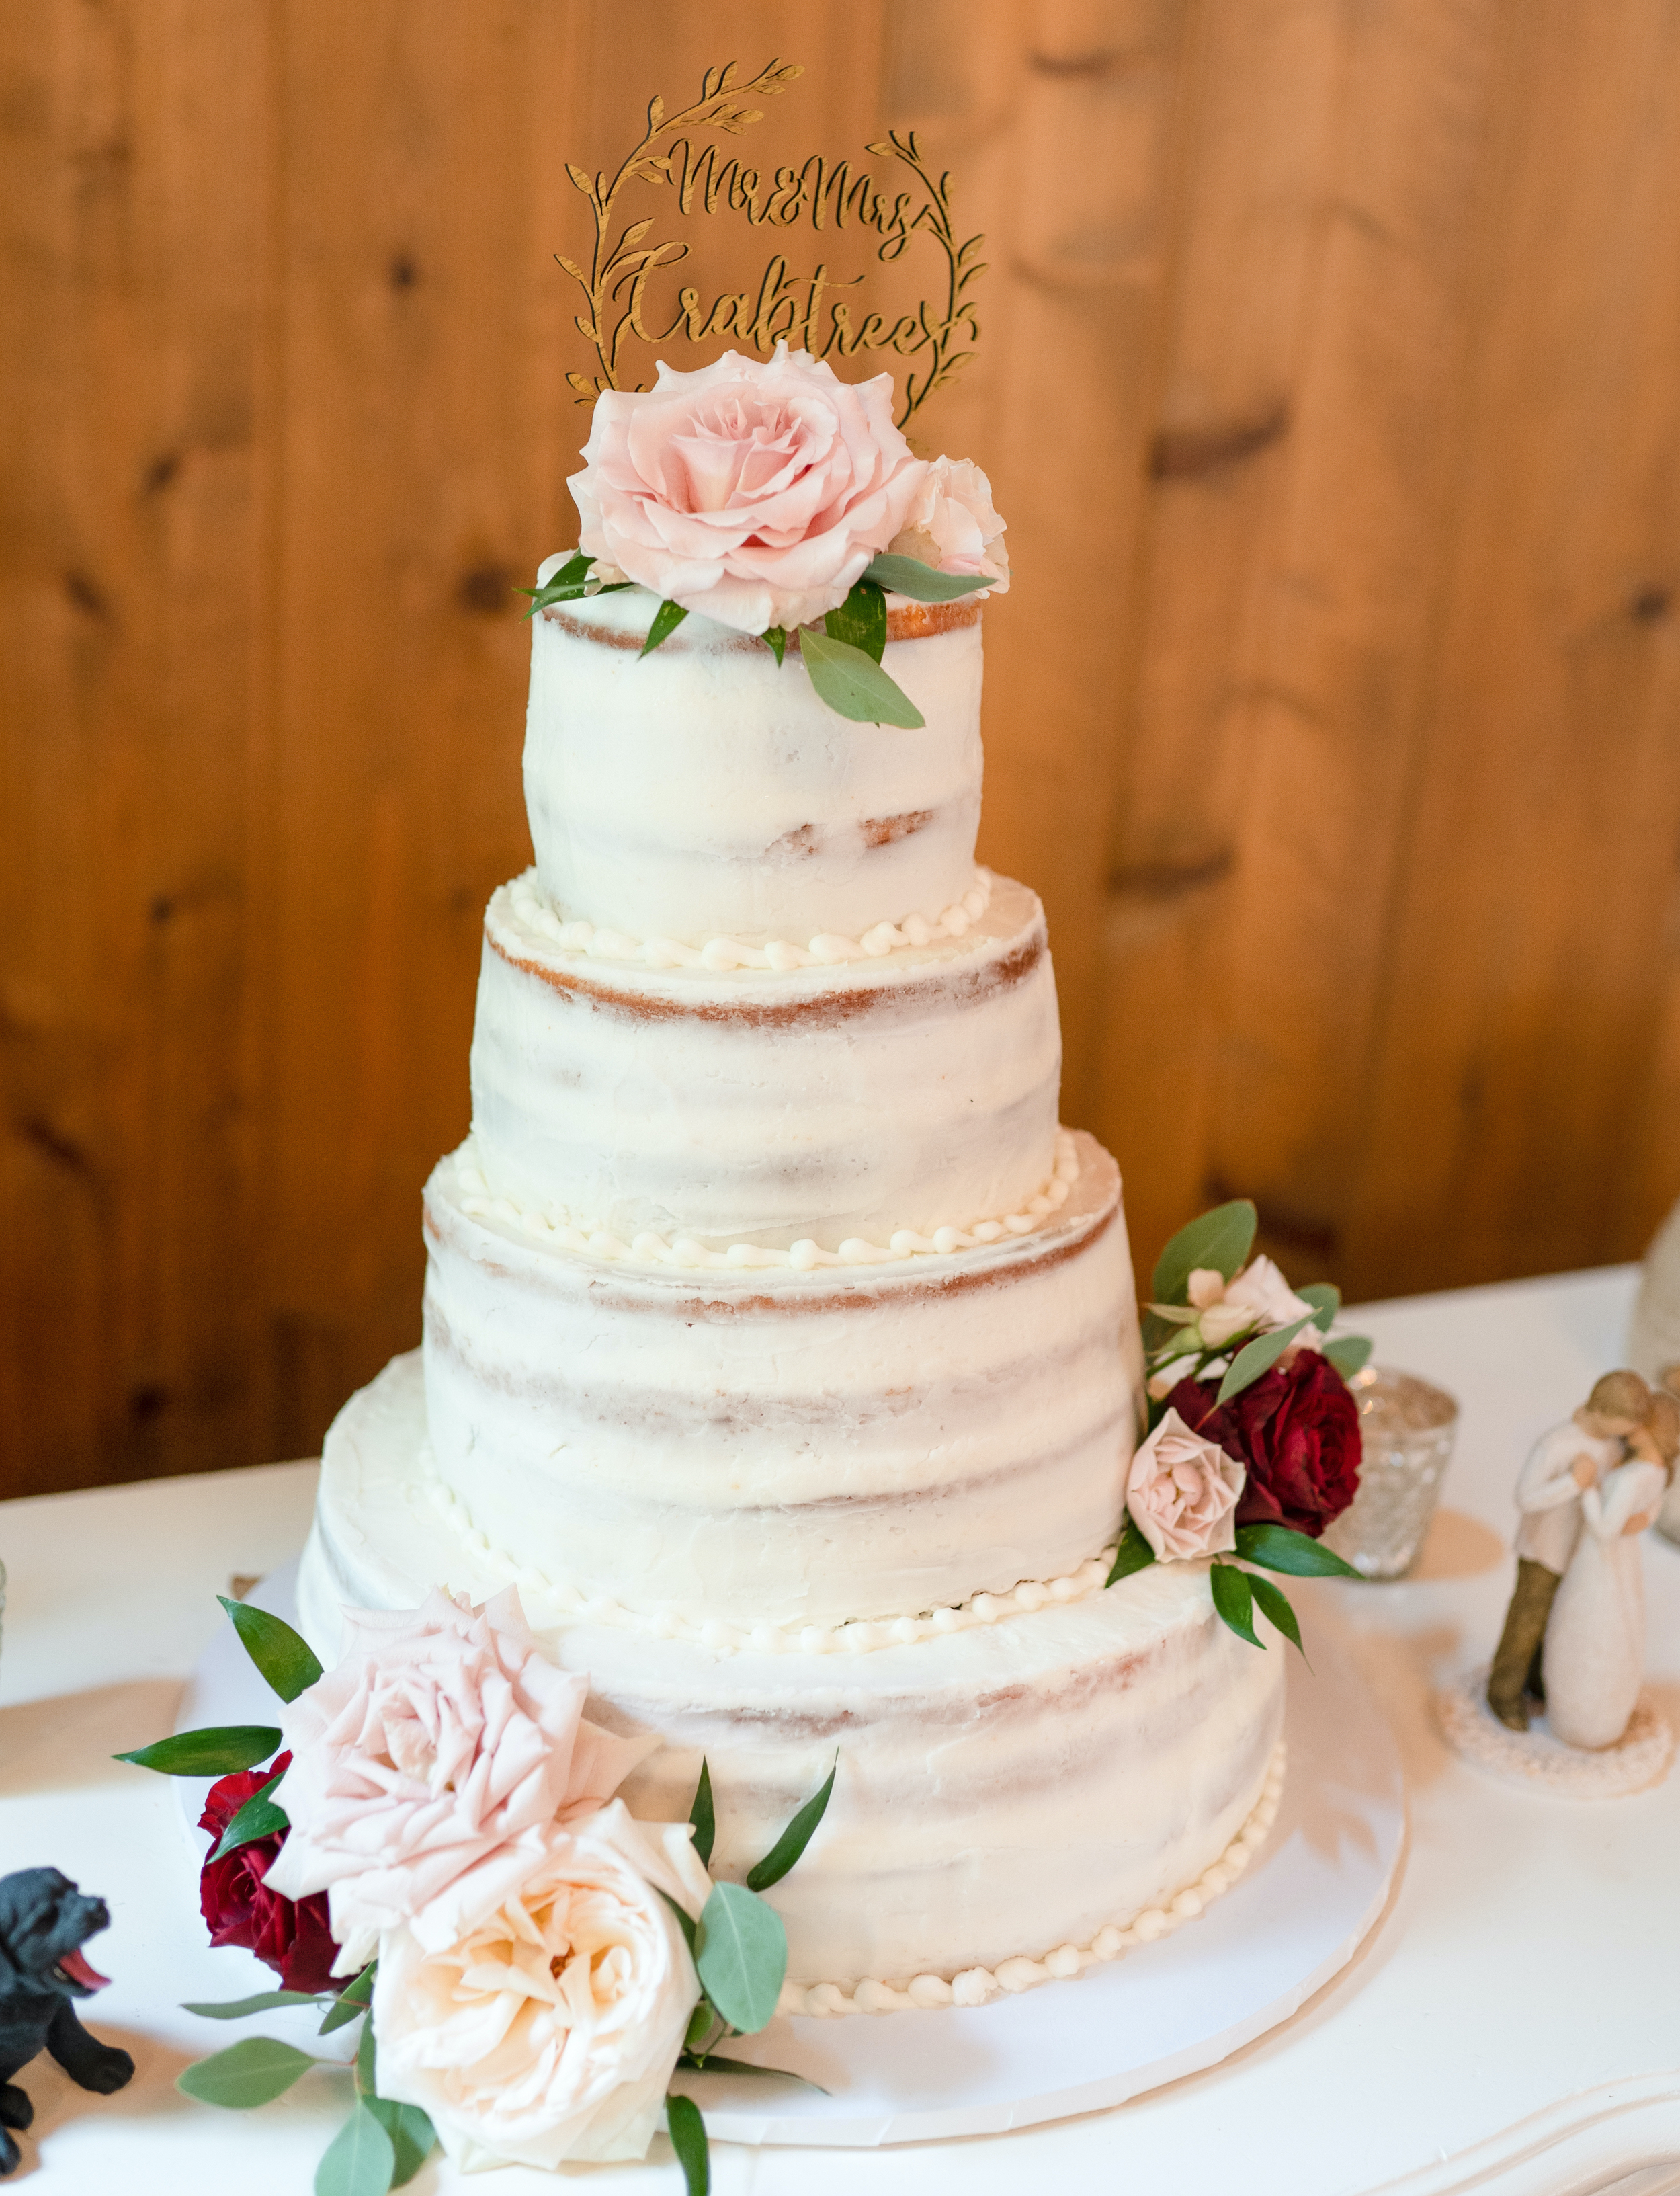 The bride and groom's wedding cake with white frosting and burgundy and blush flowers.